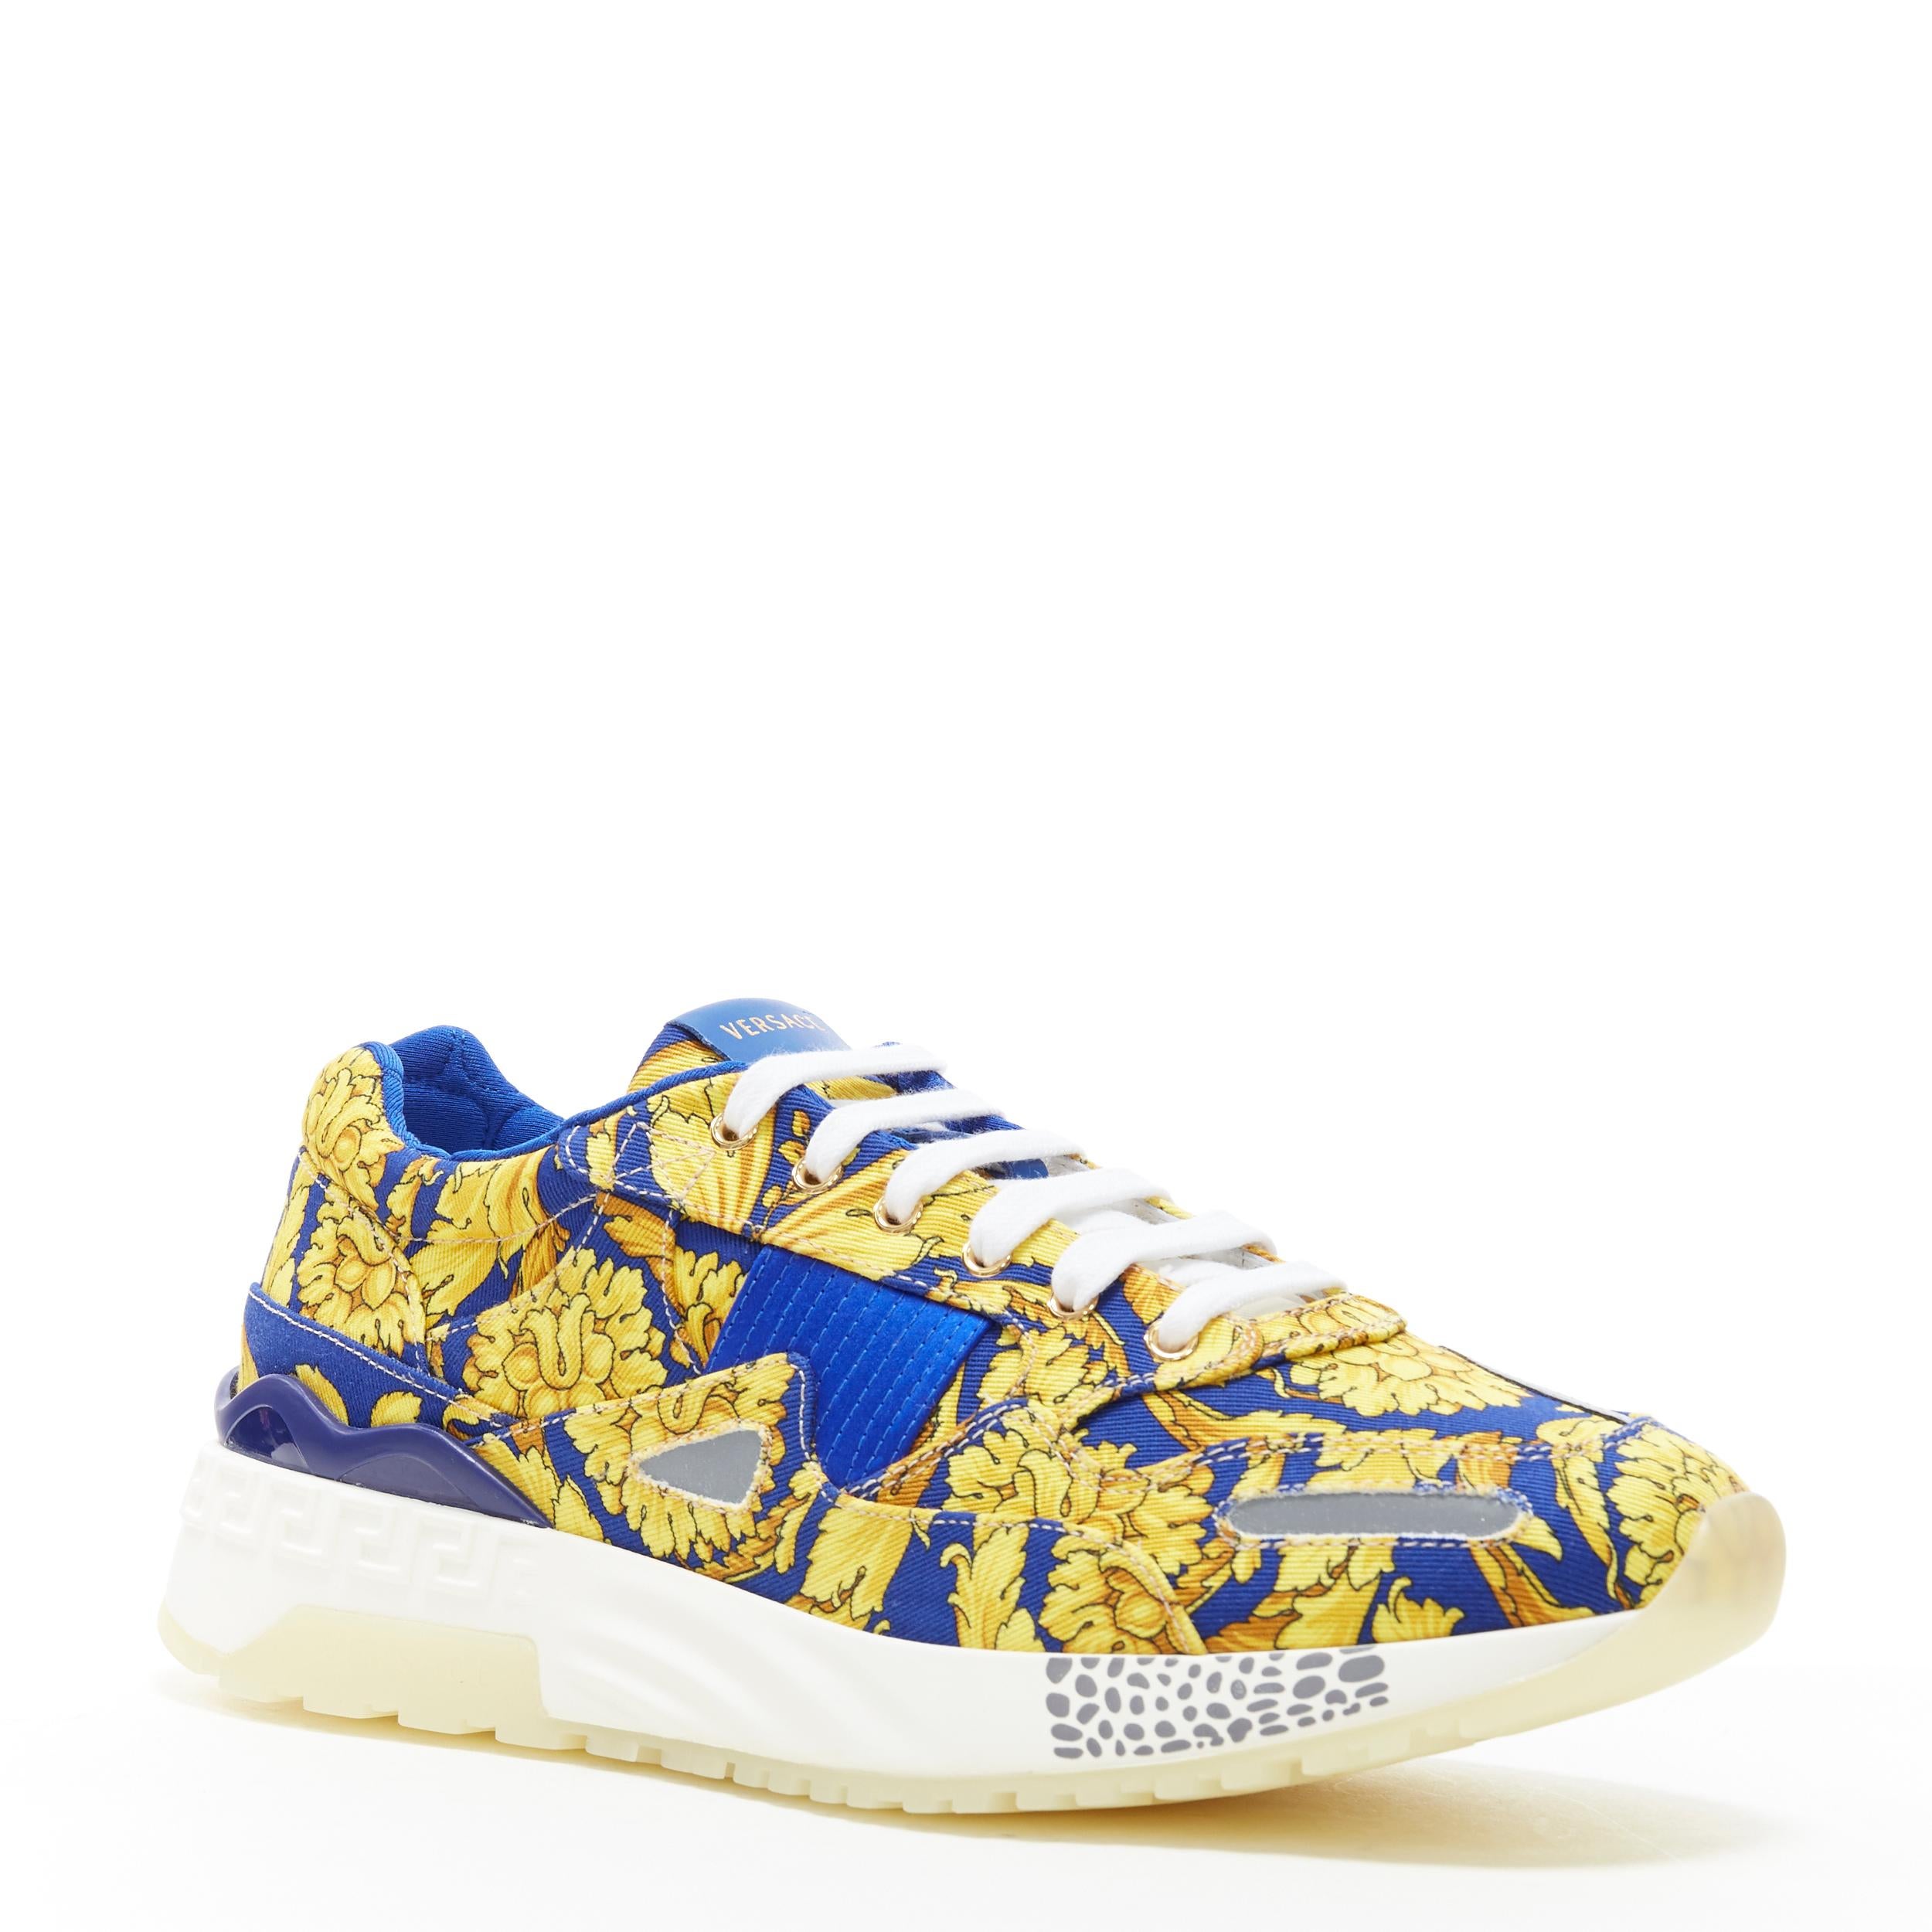 new VERSACE Achilles blue gold baroque pillow talk chunky sole dad sneakers EU43
Brand: Versace
Designer: Donatella Versace
Model Name / Style: Achilles sneakers
Material: Fabric
Color: Blue and gold
Pattern: Floral; baroque floral
Closure: Lace